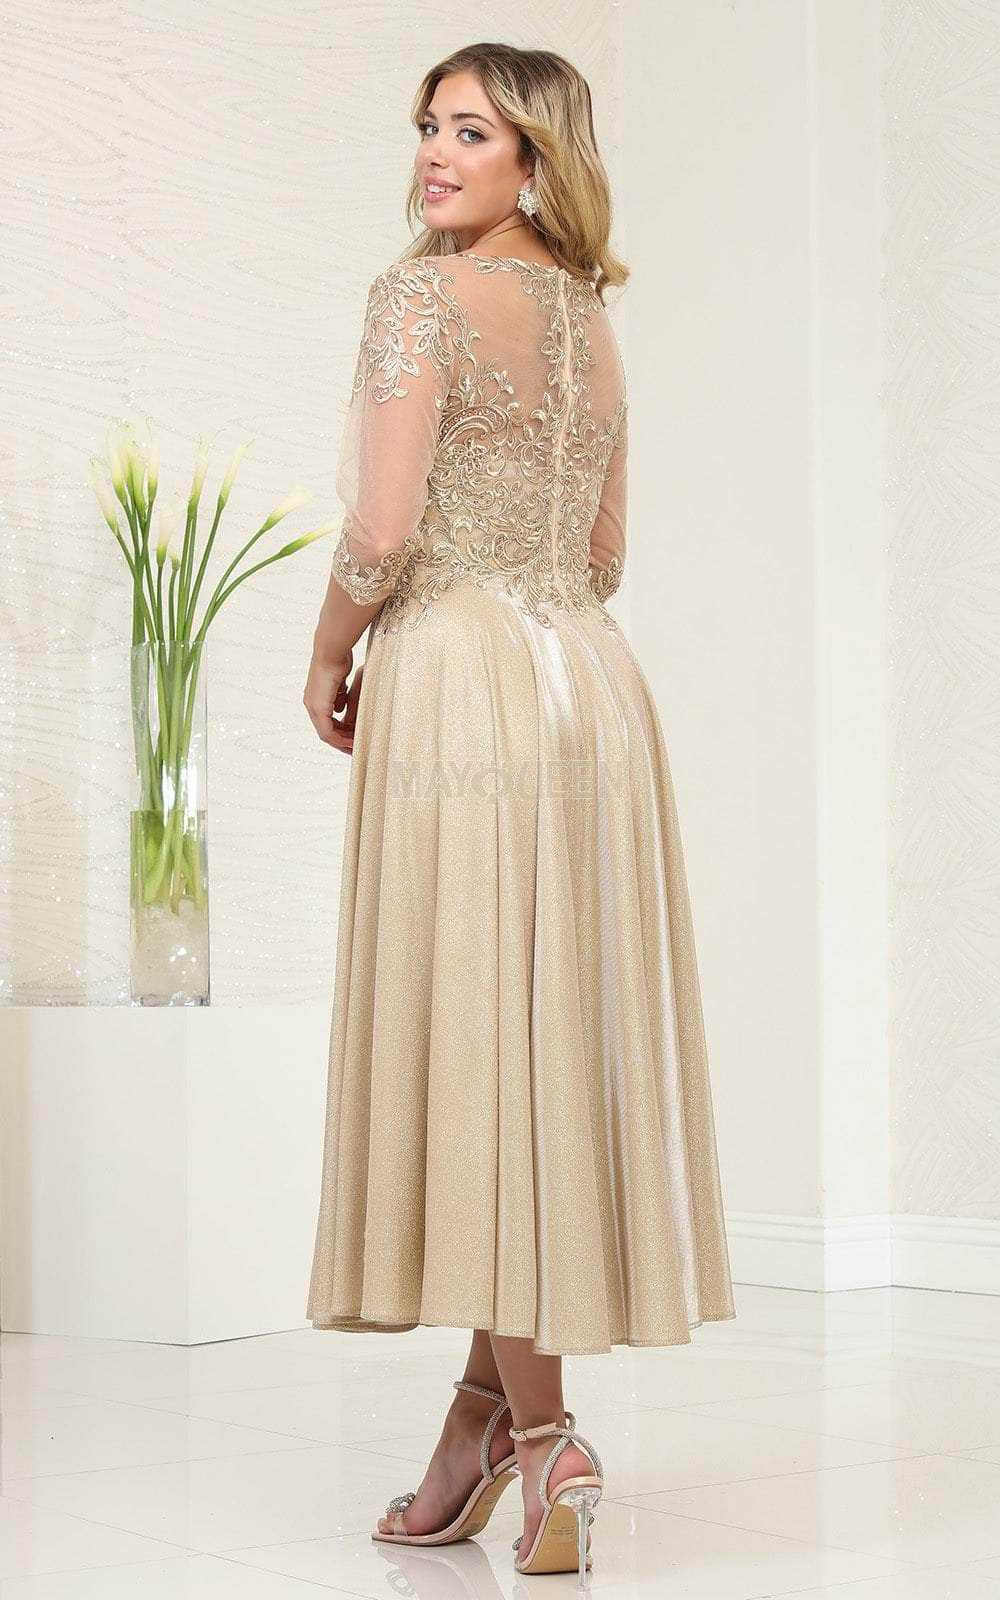 May Queen, May Queen MQ2057 - Illusion Scoop Tea Length Prom Dress